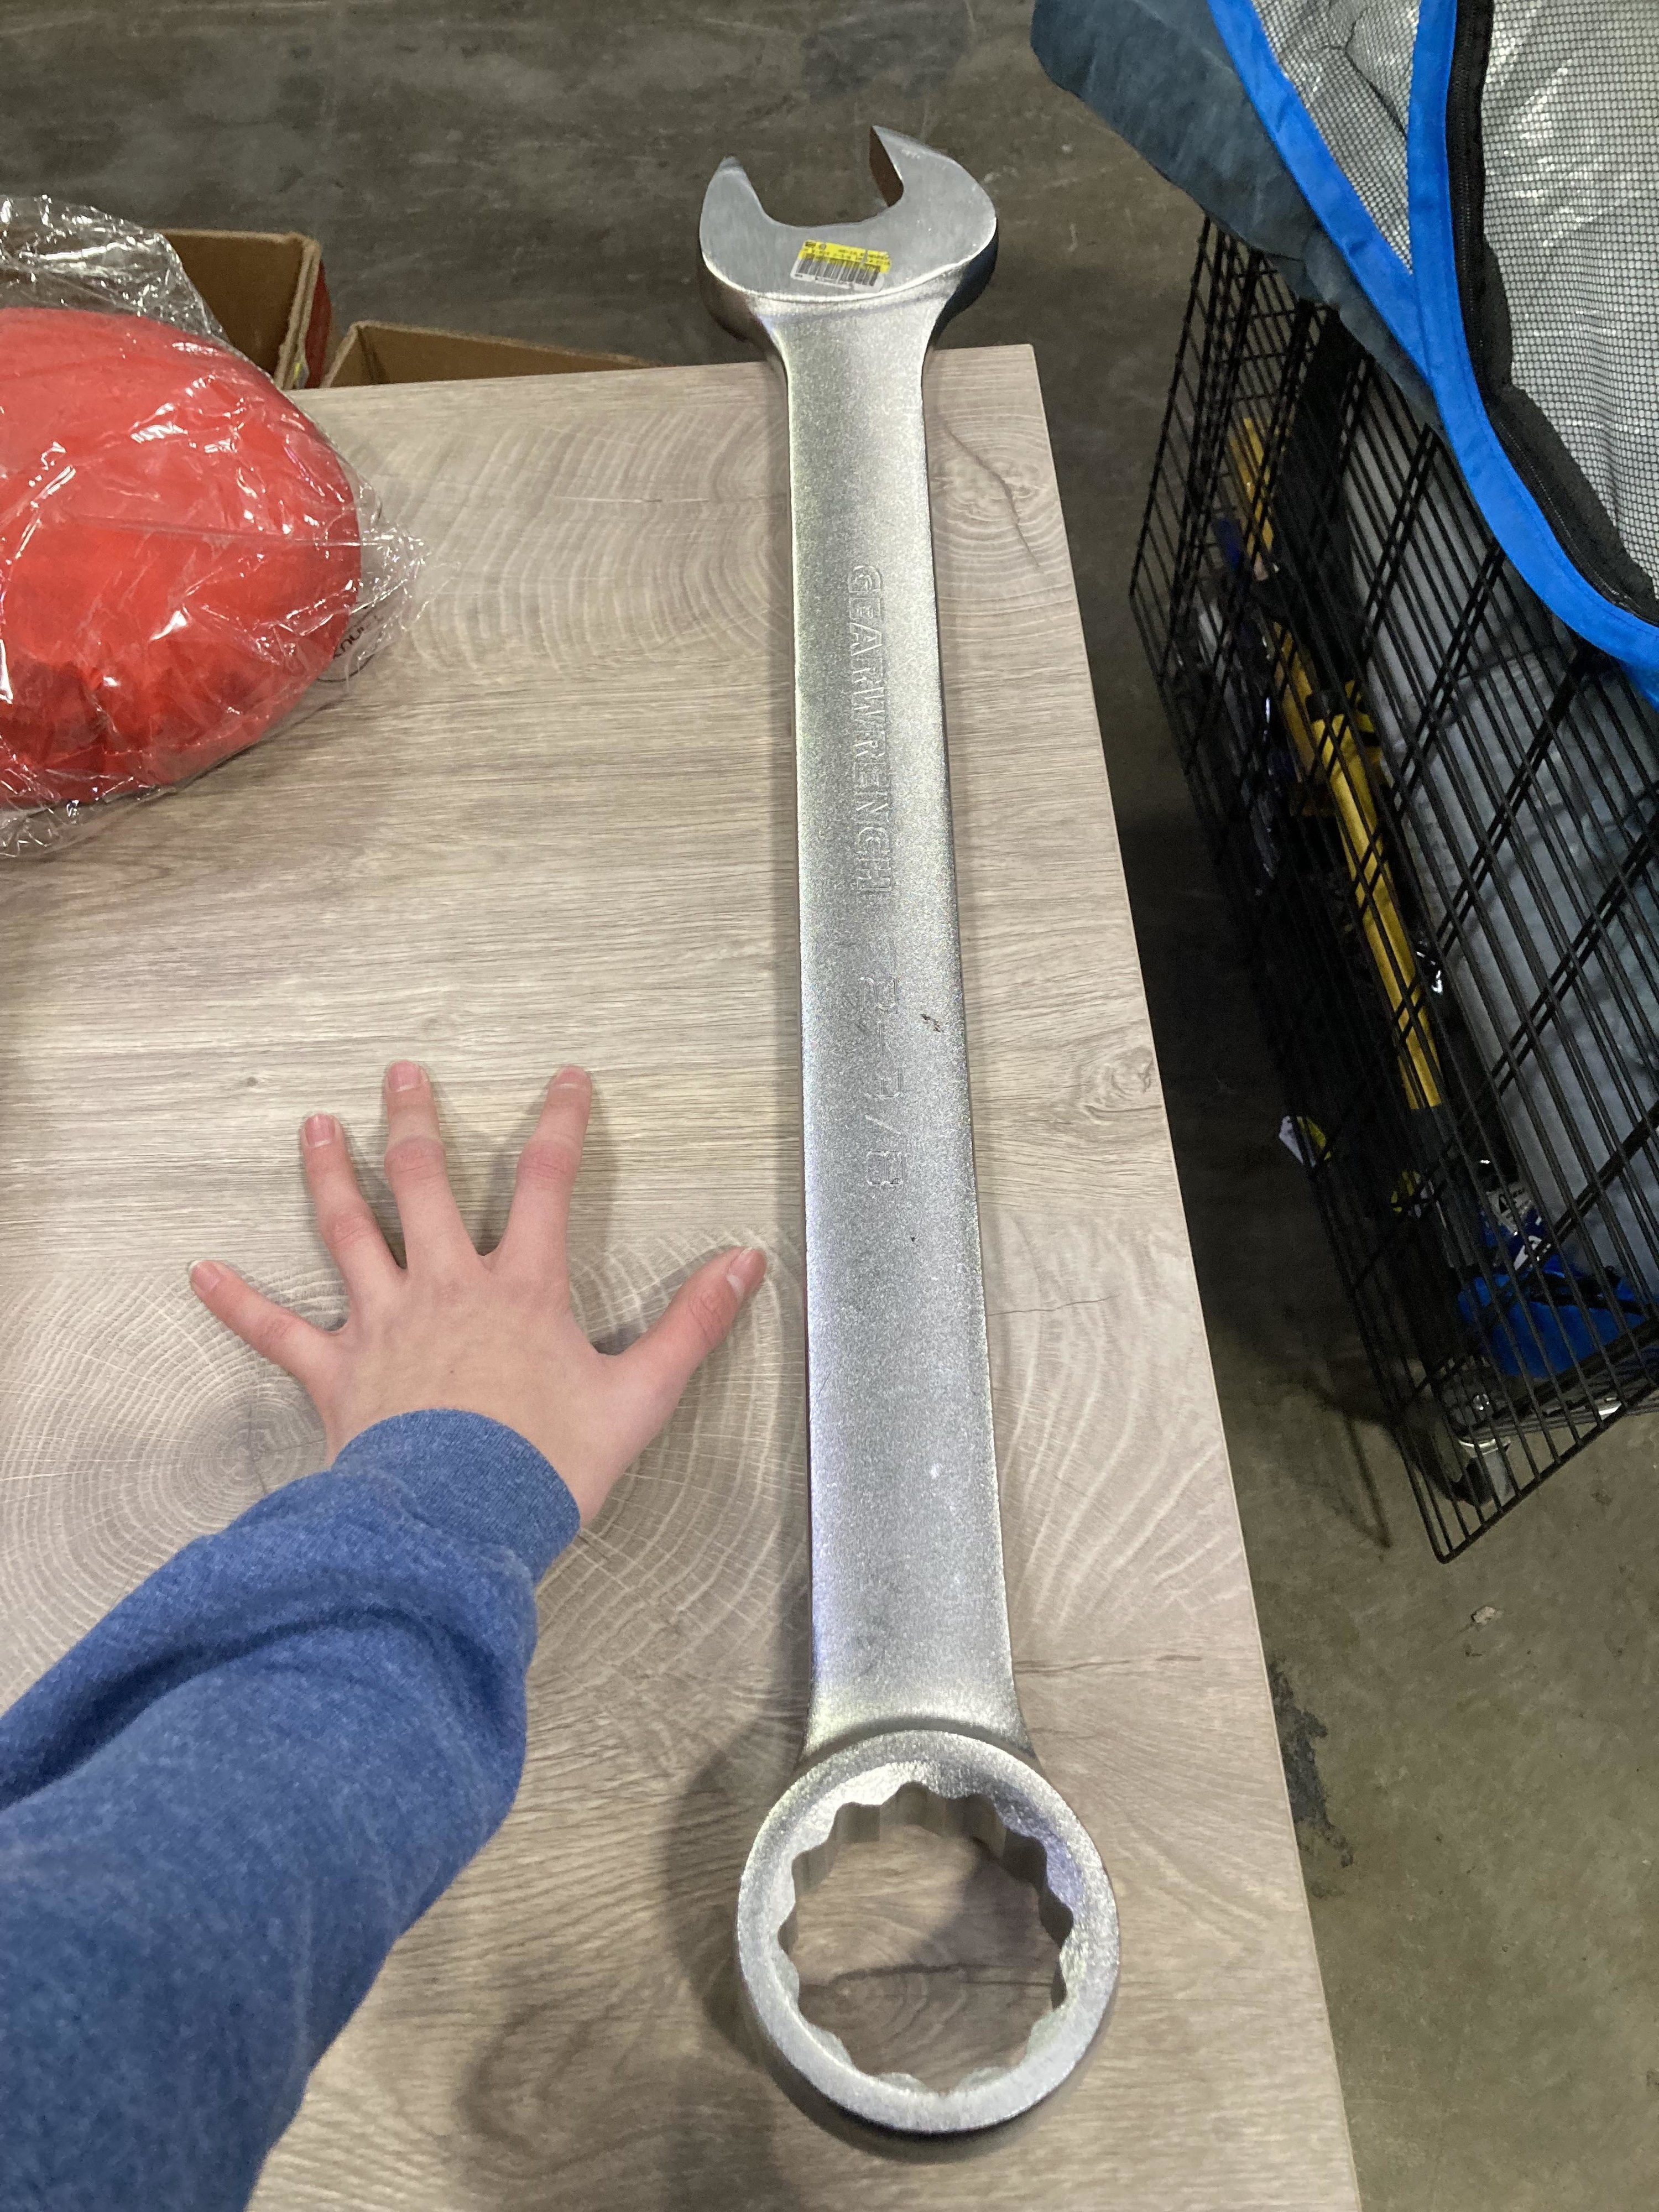 A giant wrench about twice as long as a person&#x27;s arm next to it